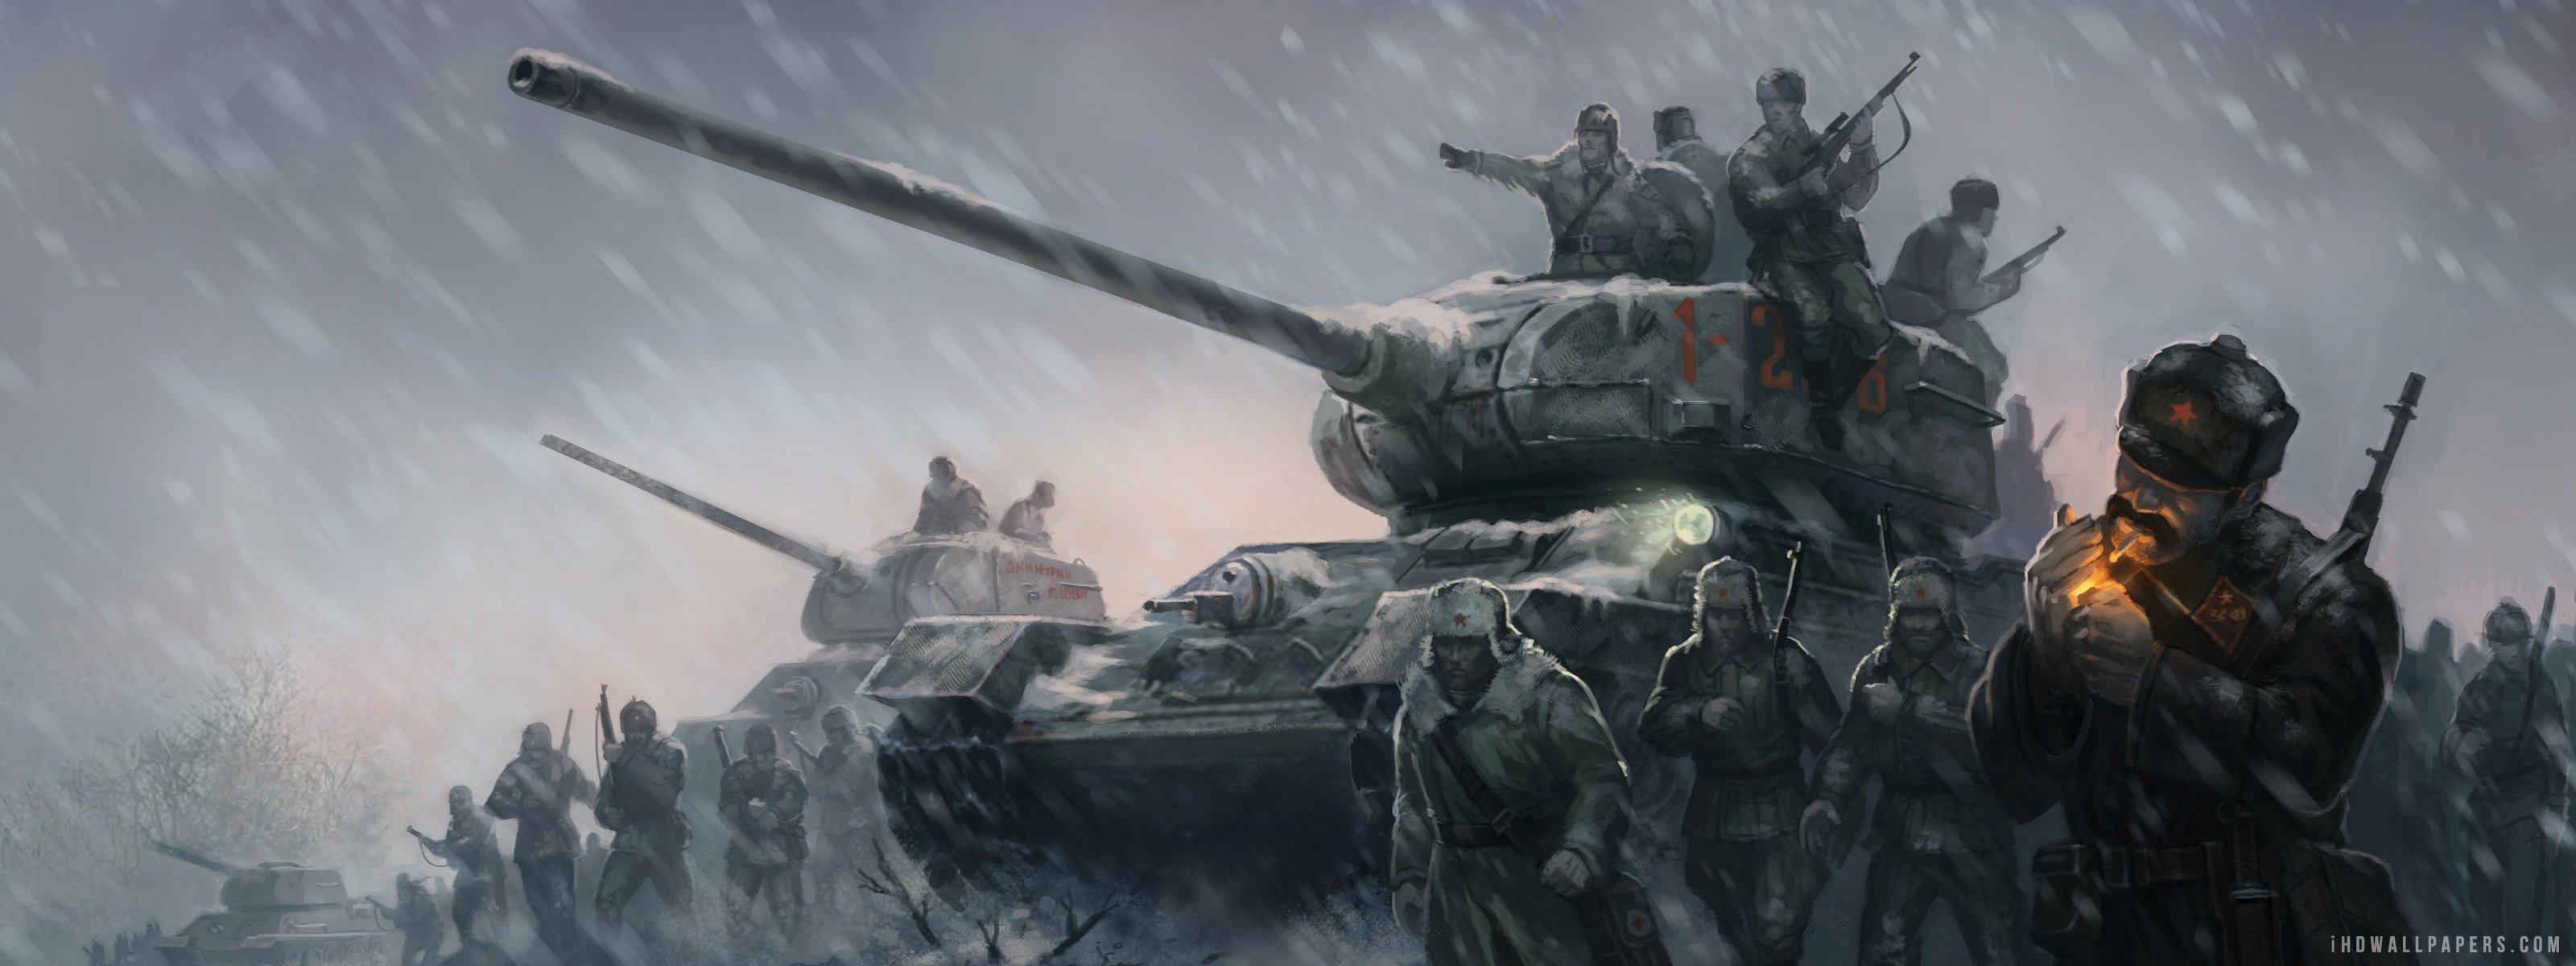 Company of Heroes Game HD Wallpaper iHD Wallpapers